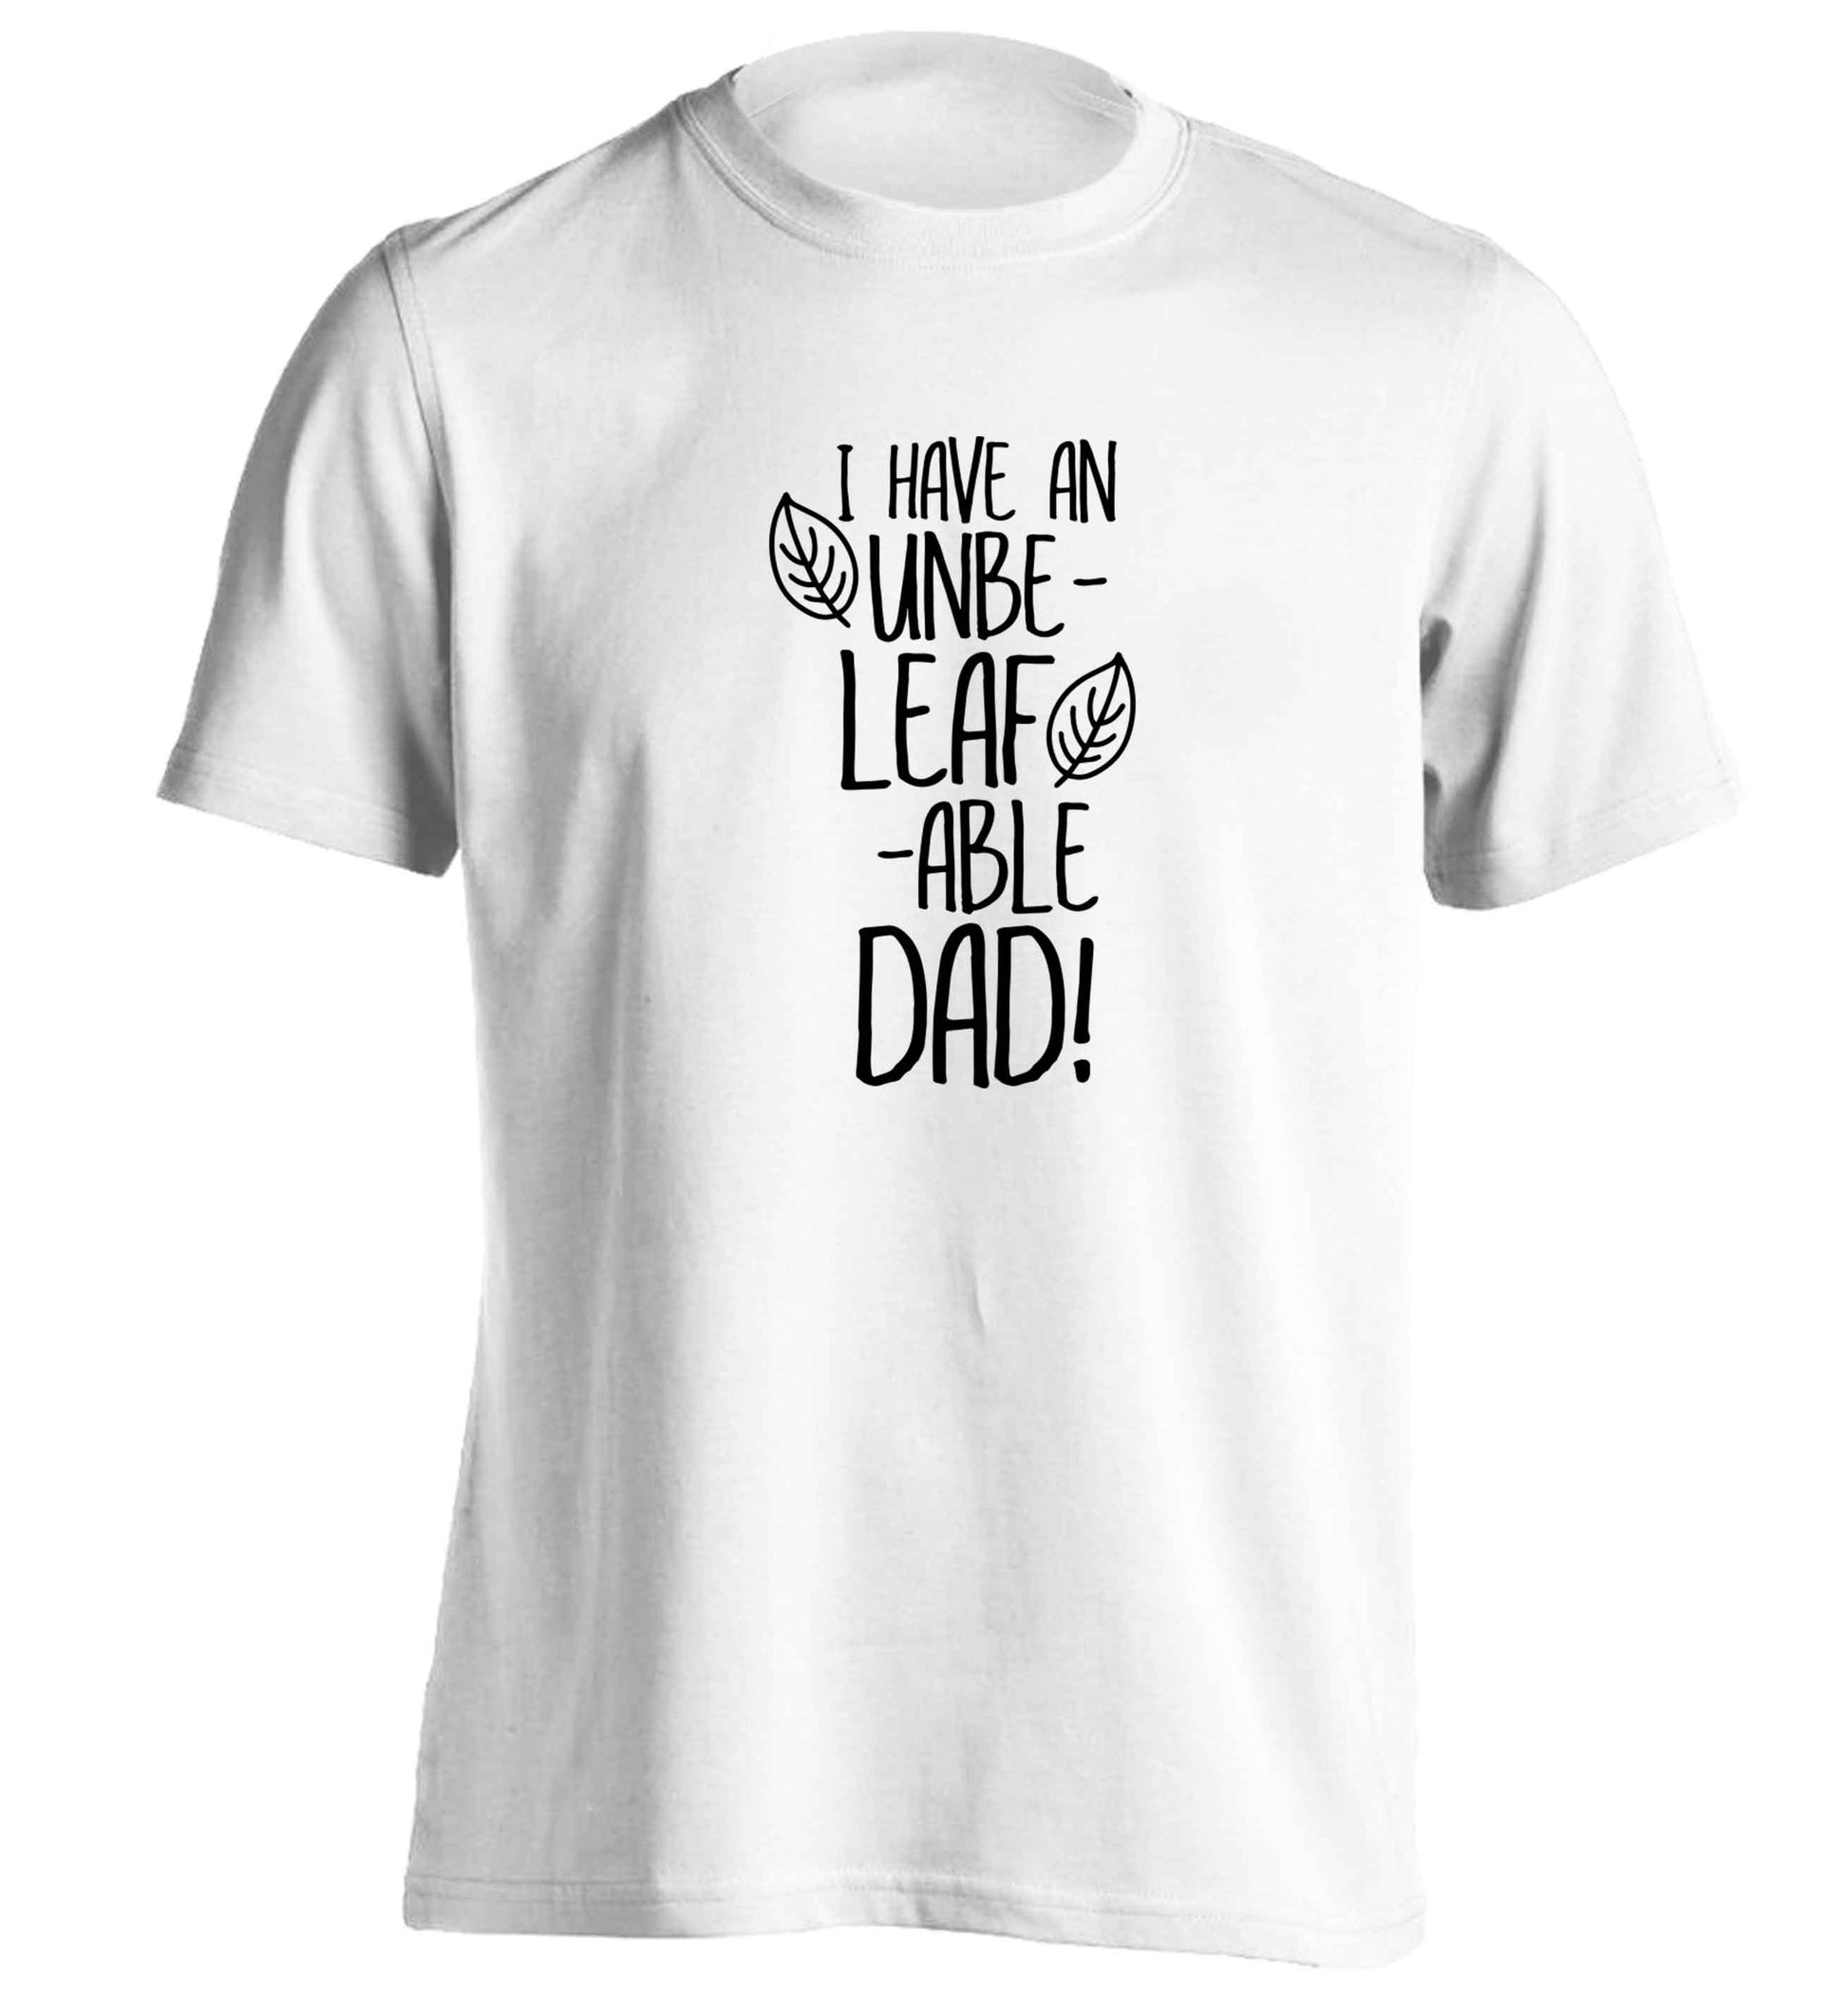 I have an unbe-leaf-able dad adults unisex white Tshirt 2XL